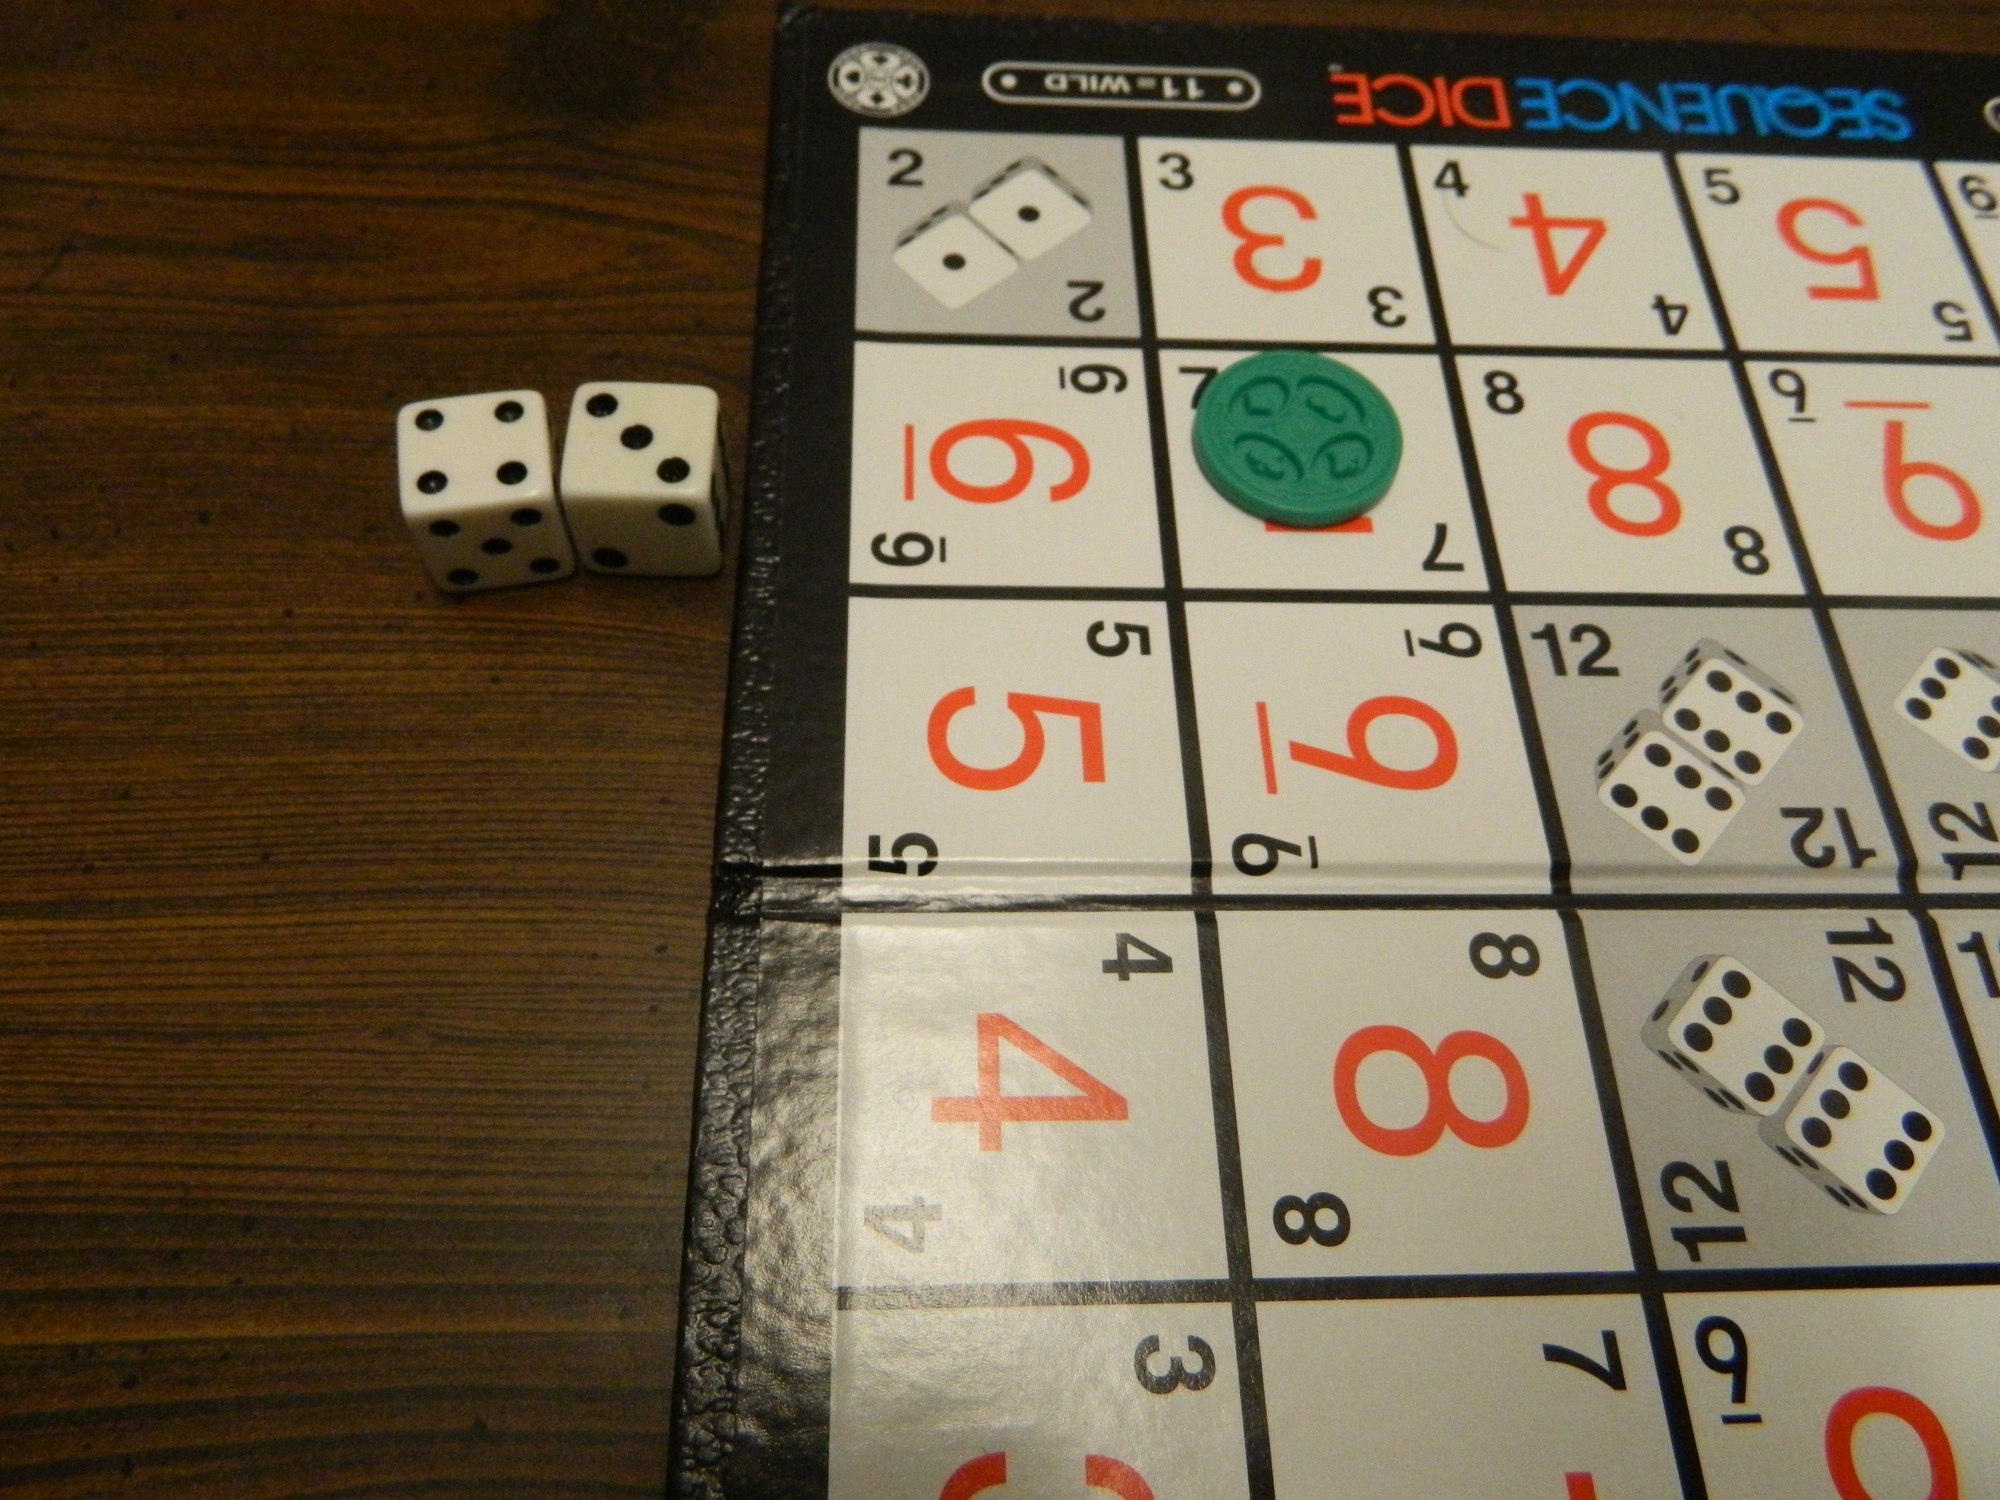 sequence-dice-board-game-review-and-rules-geeky-hobbies